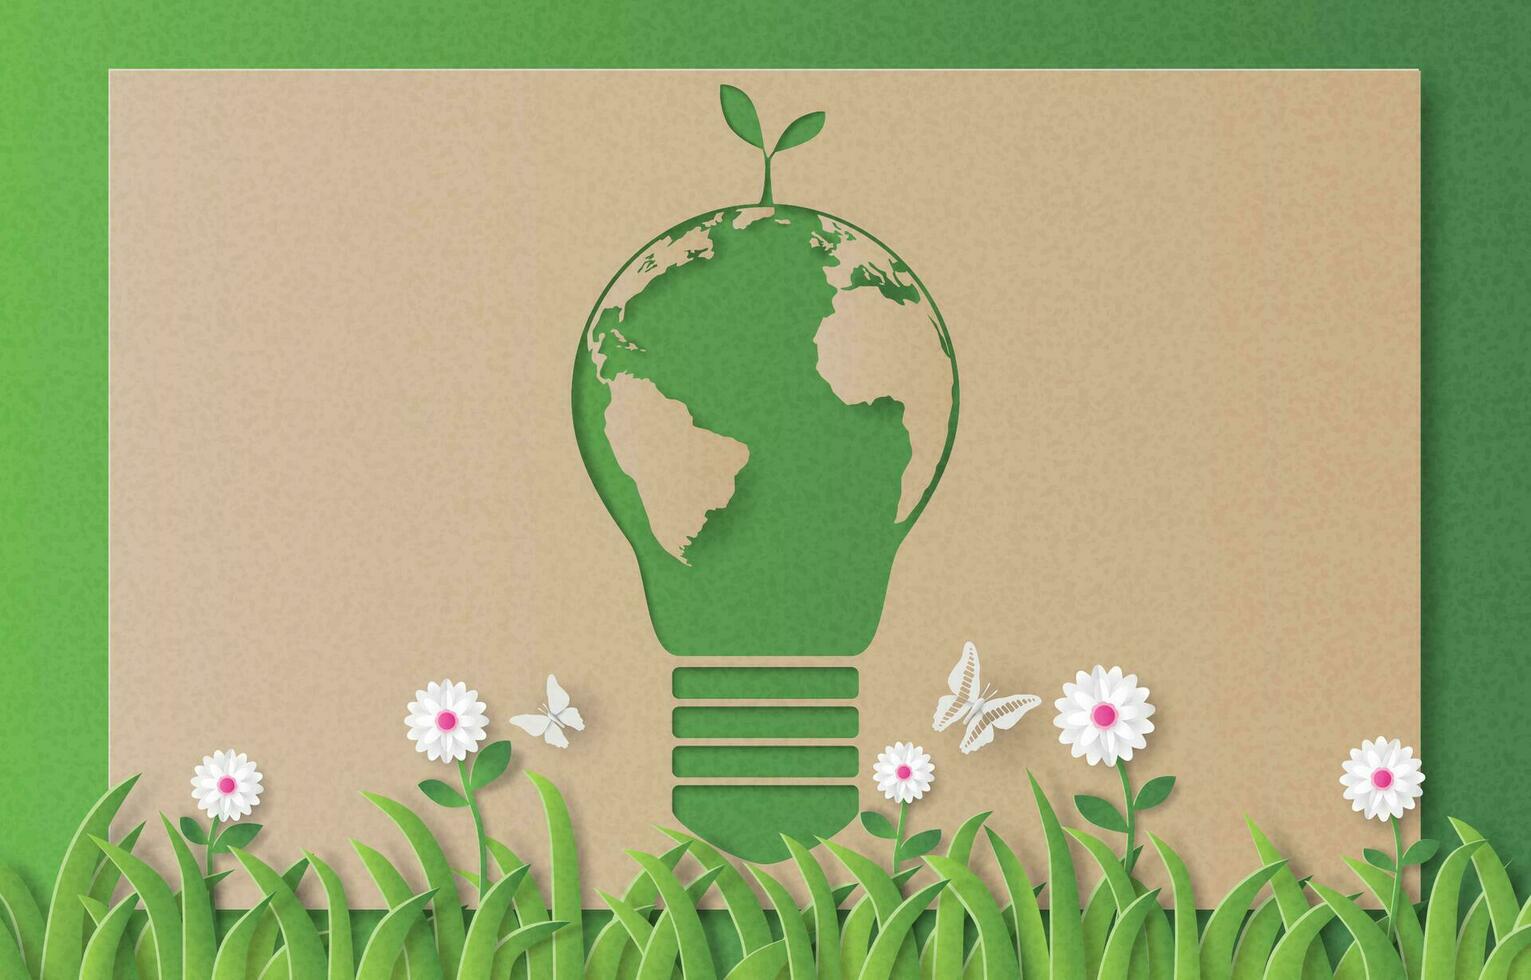 Paper art style of light bulb with world map inside and plant over light bulb, eco friendly, save the planet and environment conservation concept. vector